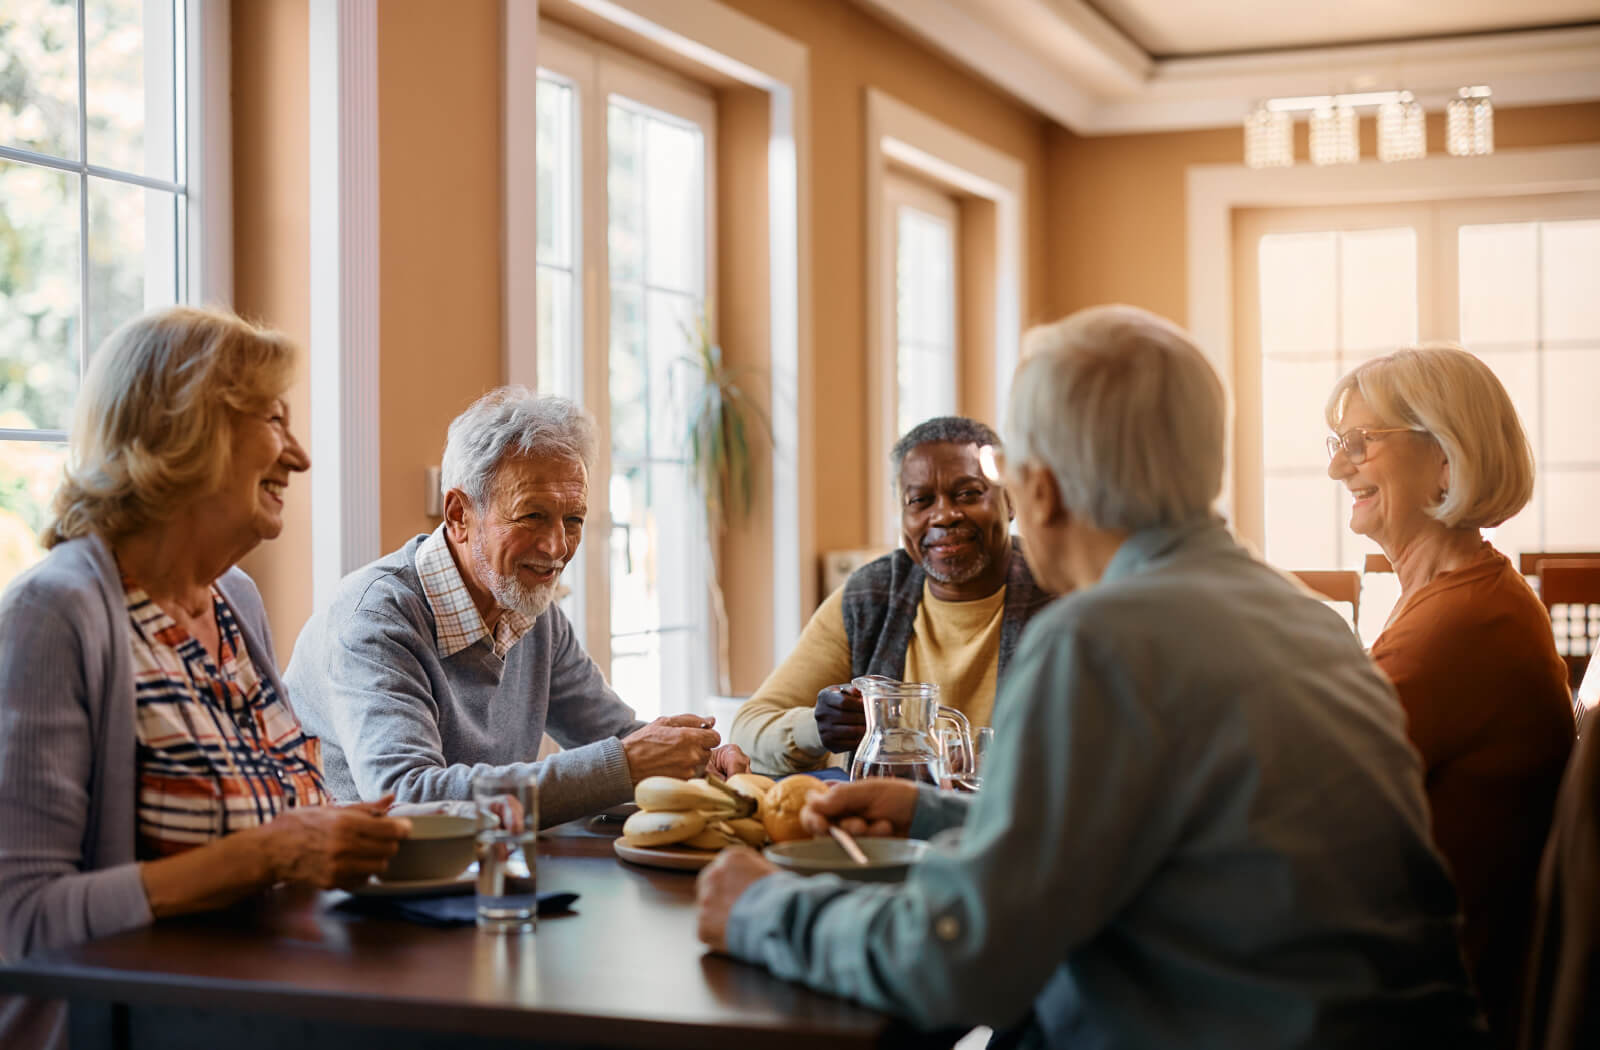 A group of seniors sitting around a table, eating and enjoying afternoon tea while smiling and chatting with each other.